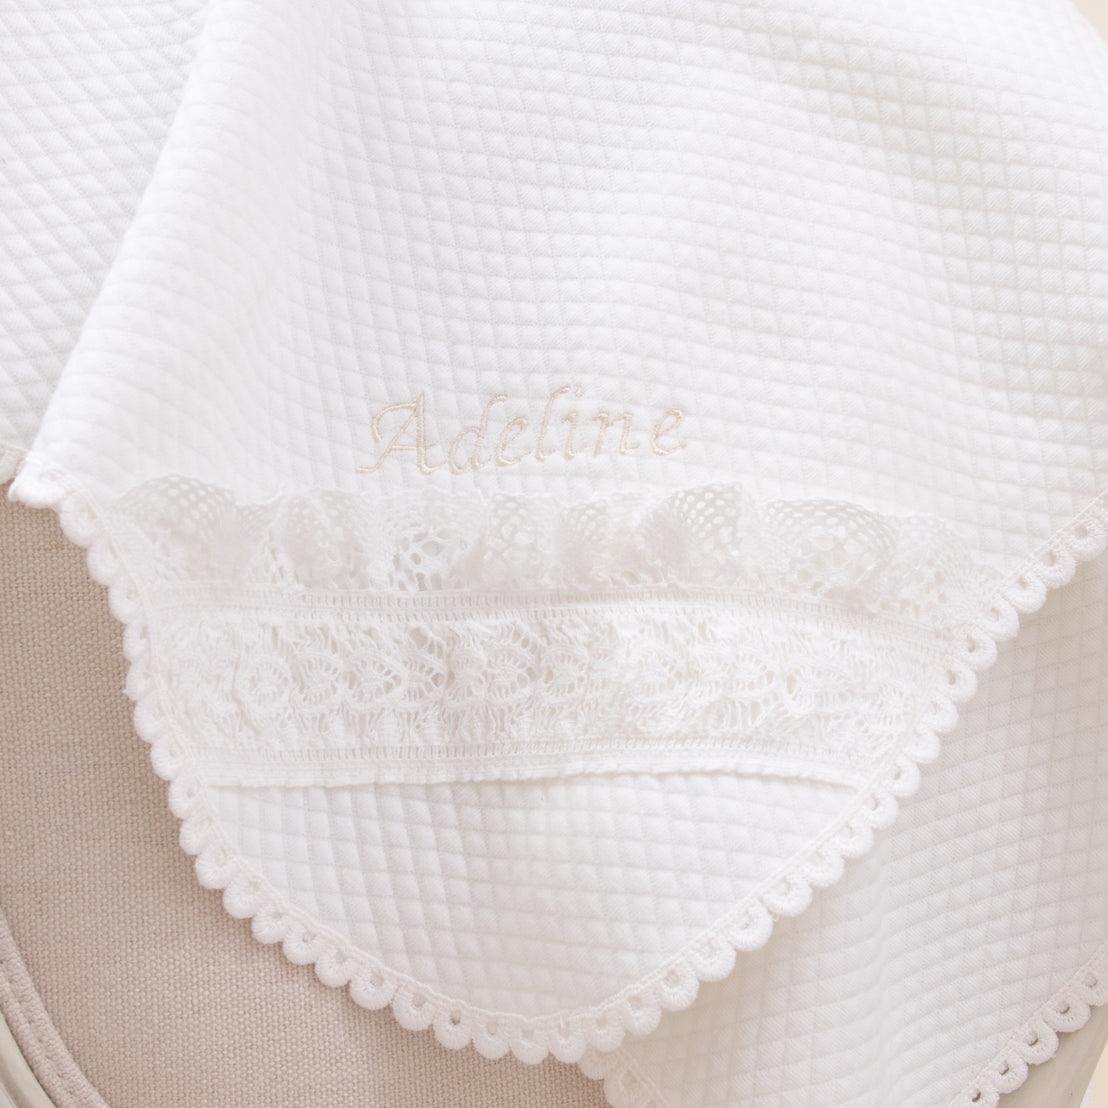 Personalized baptism blanket with embroidered name Adeline in the corner. Blanket is hanging off of chair.